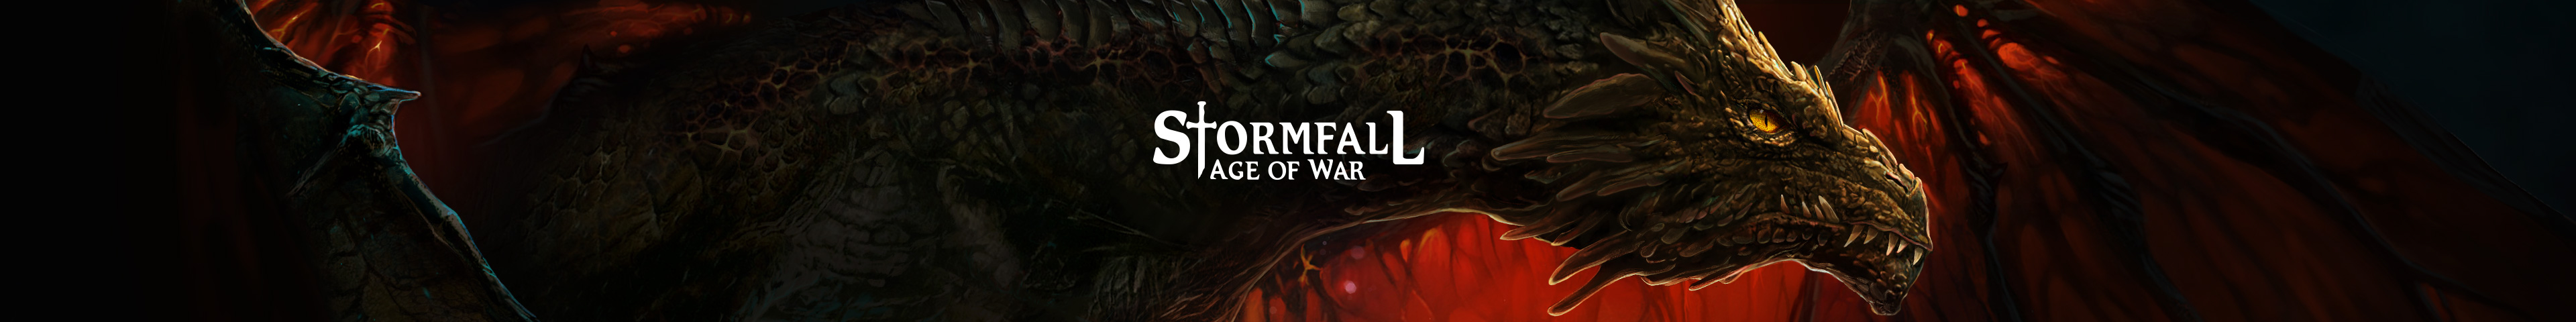 What is your favorite thing to do in Stormfall: Age of War?